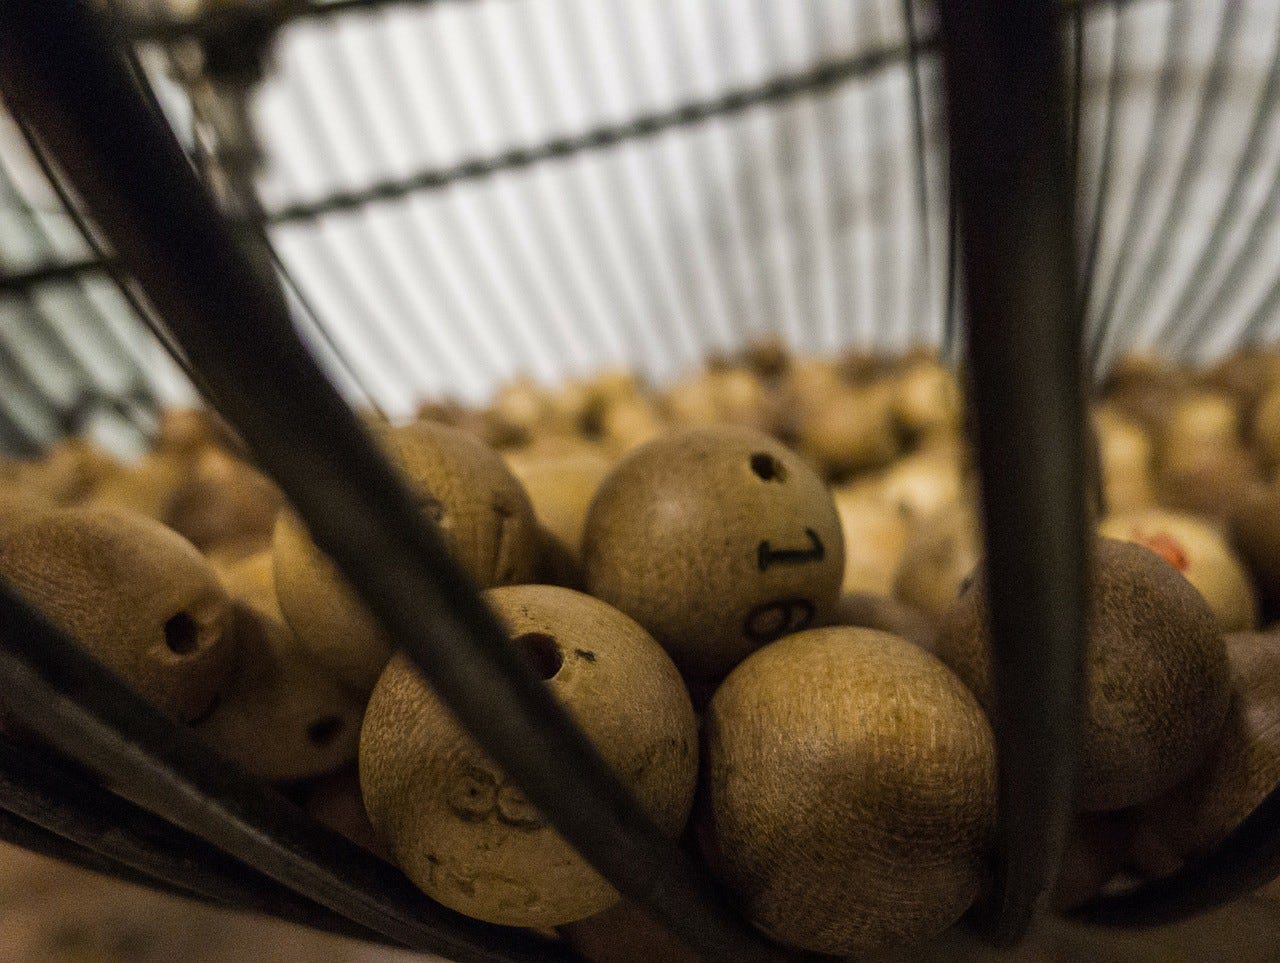 An image of lottery balls.